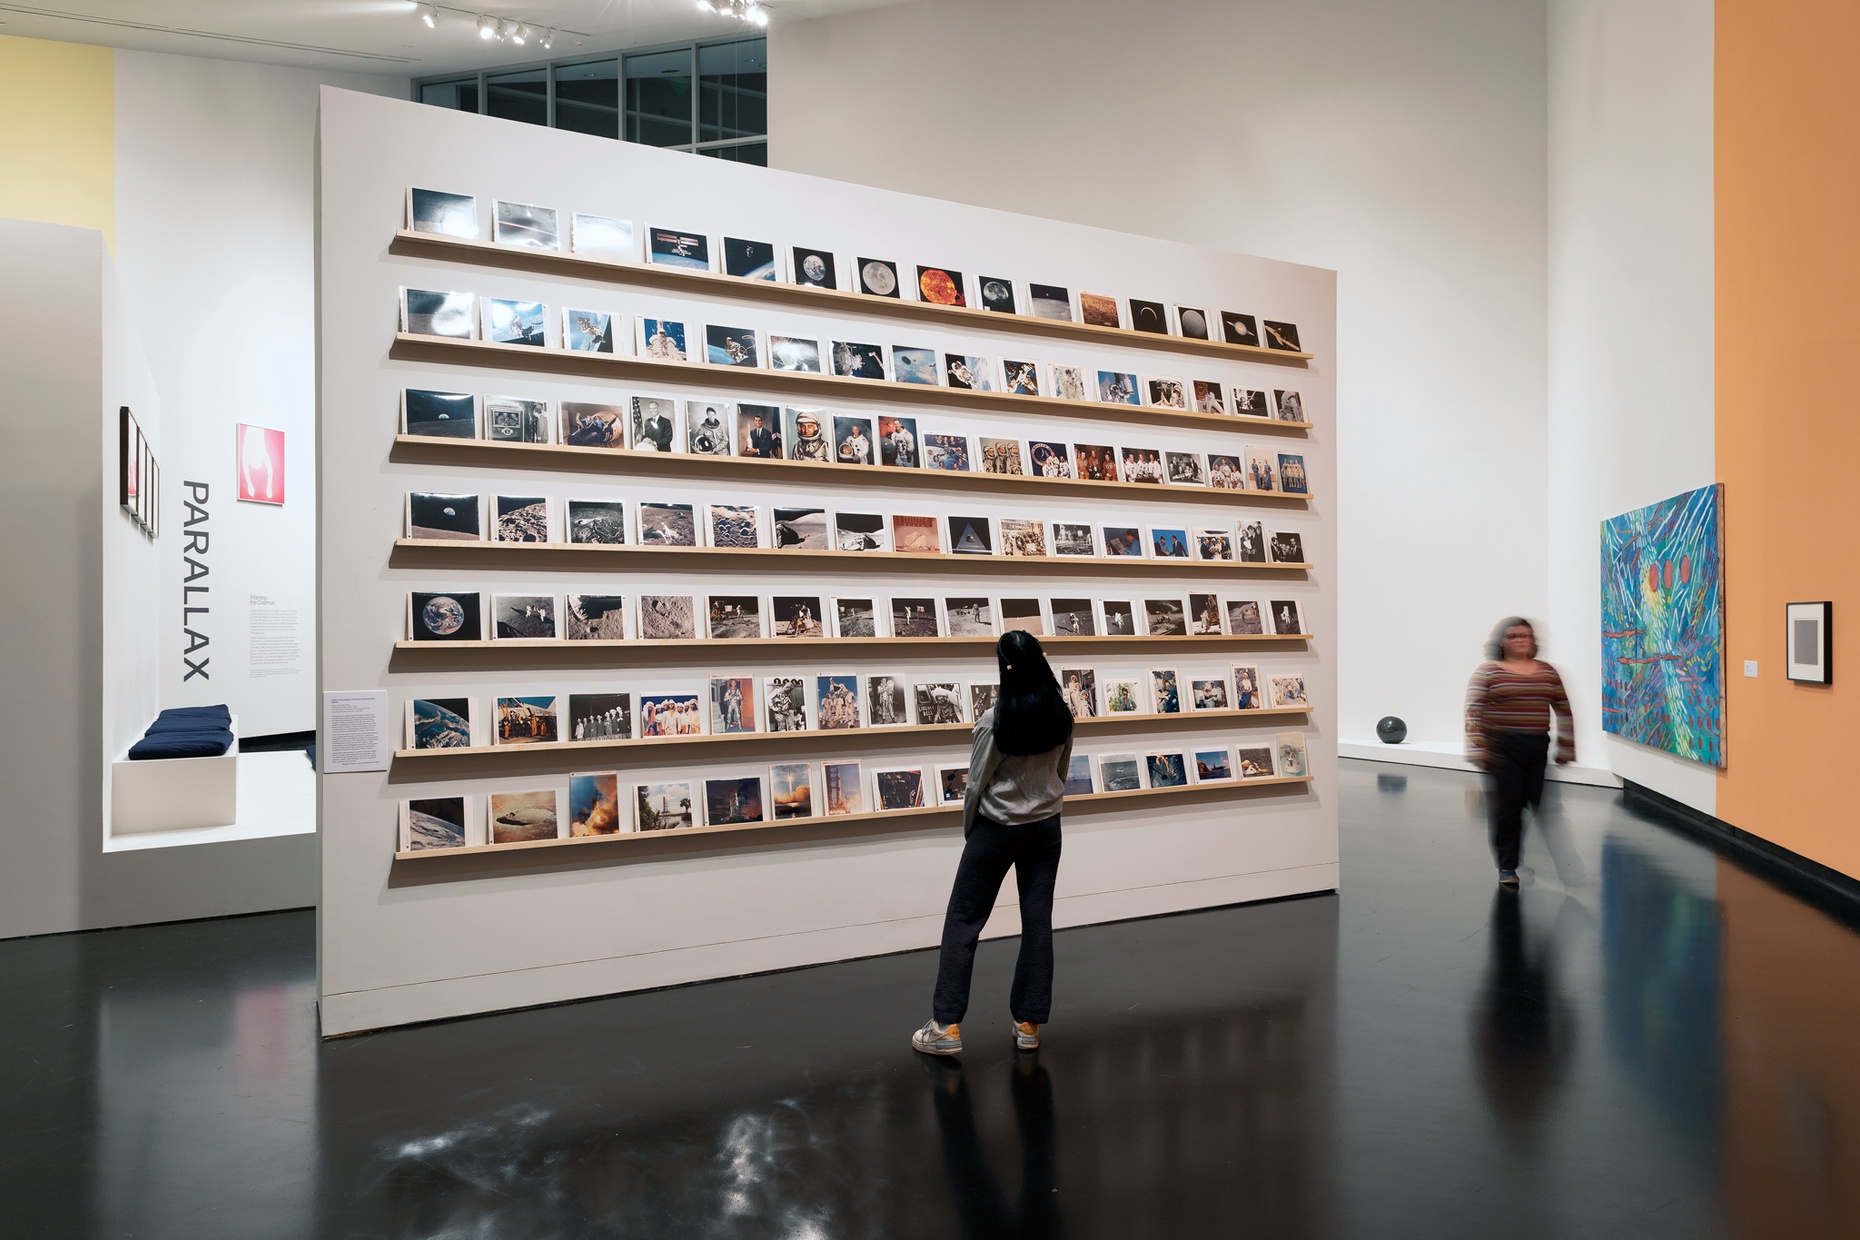 A gallery features a freestanding wall on which sits rows of many small photographs while a young woman with her back to us observes, and another blurred person walks by.